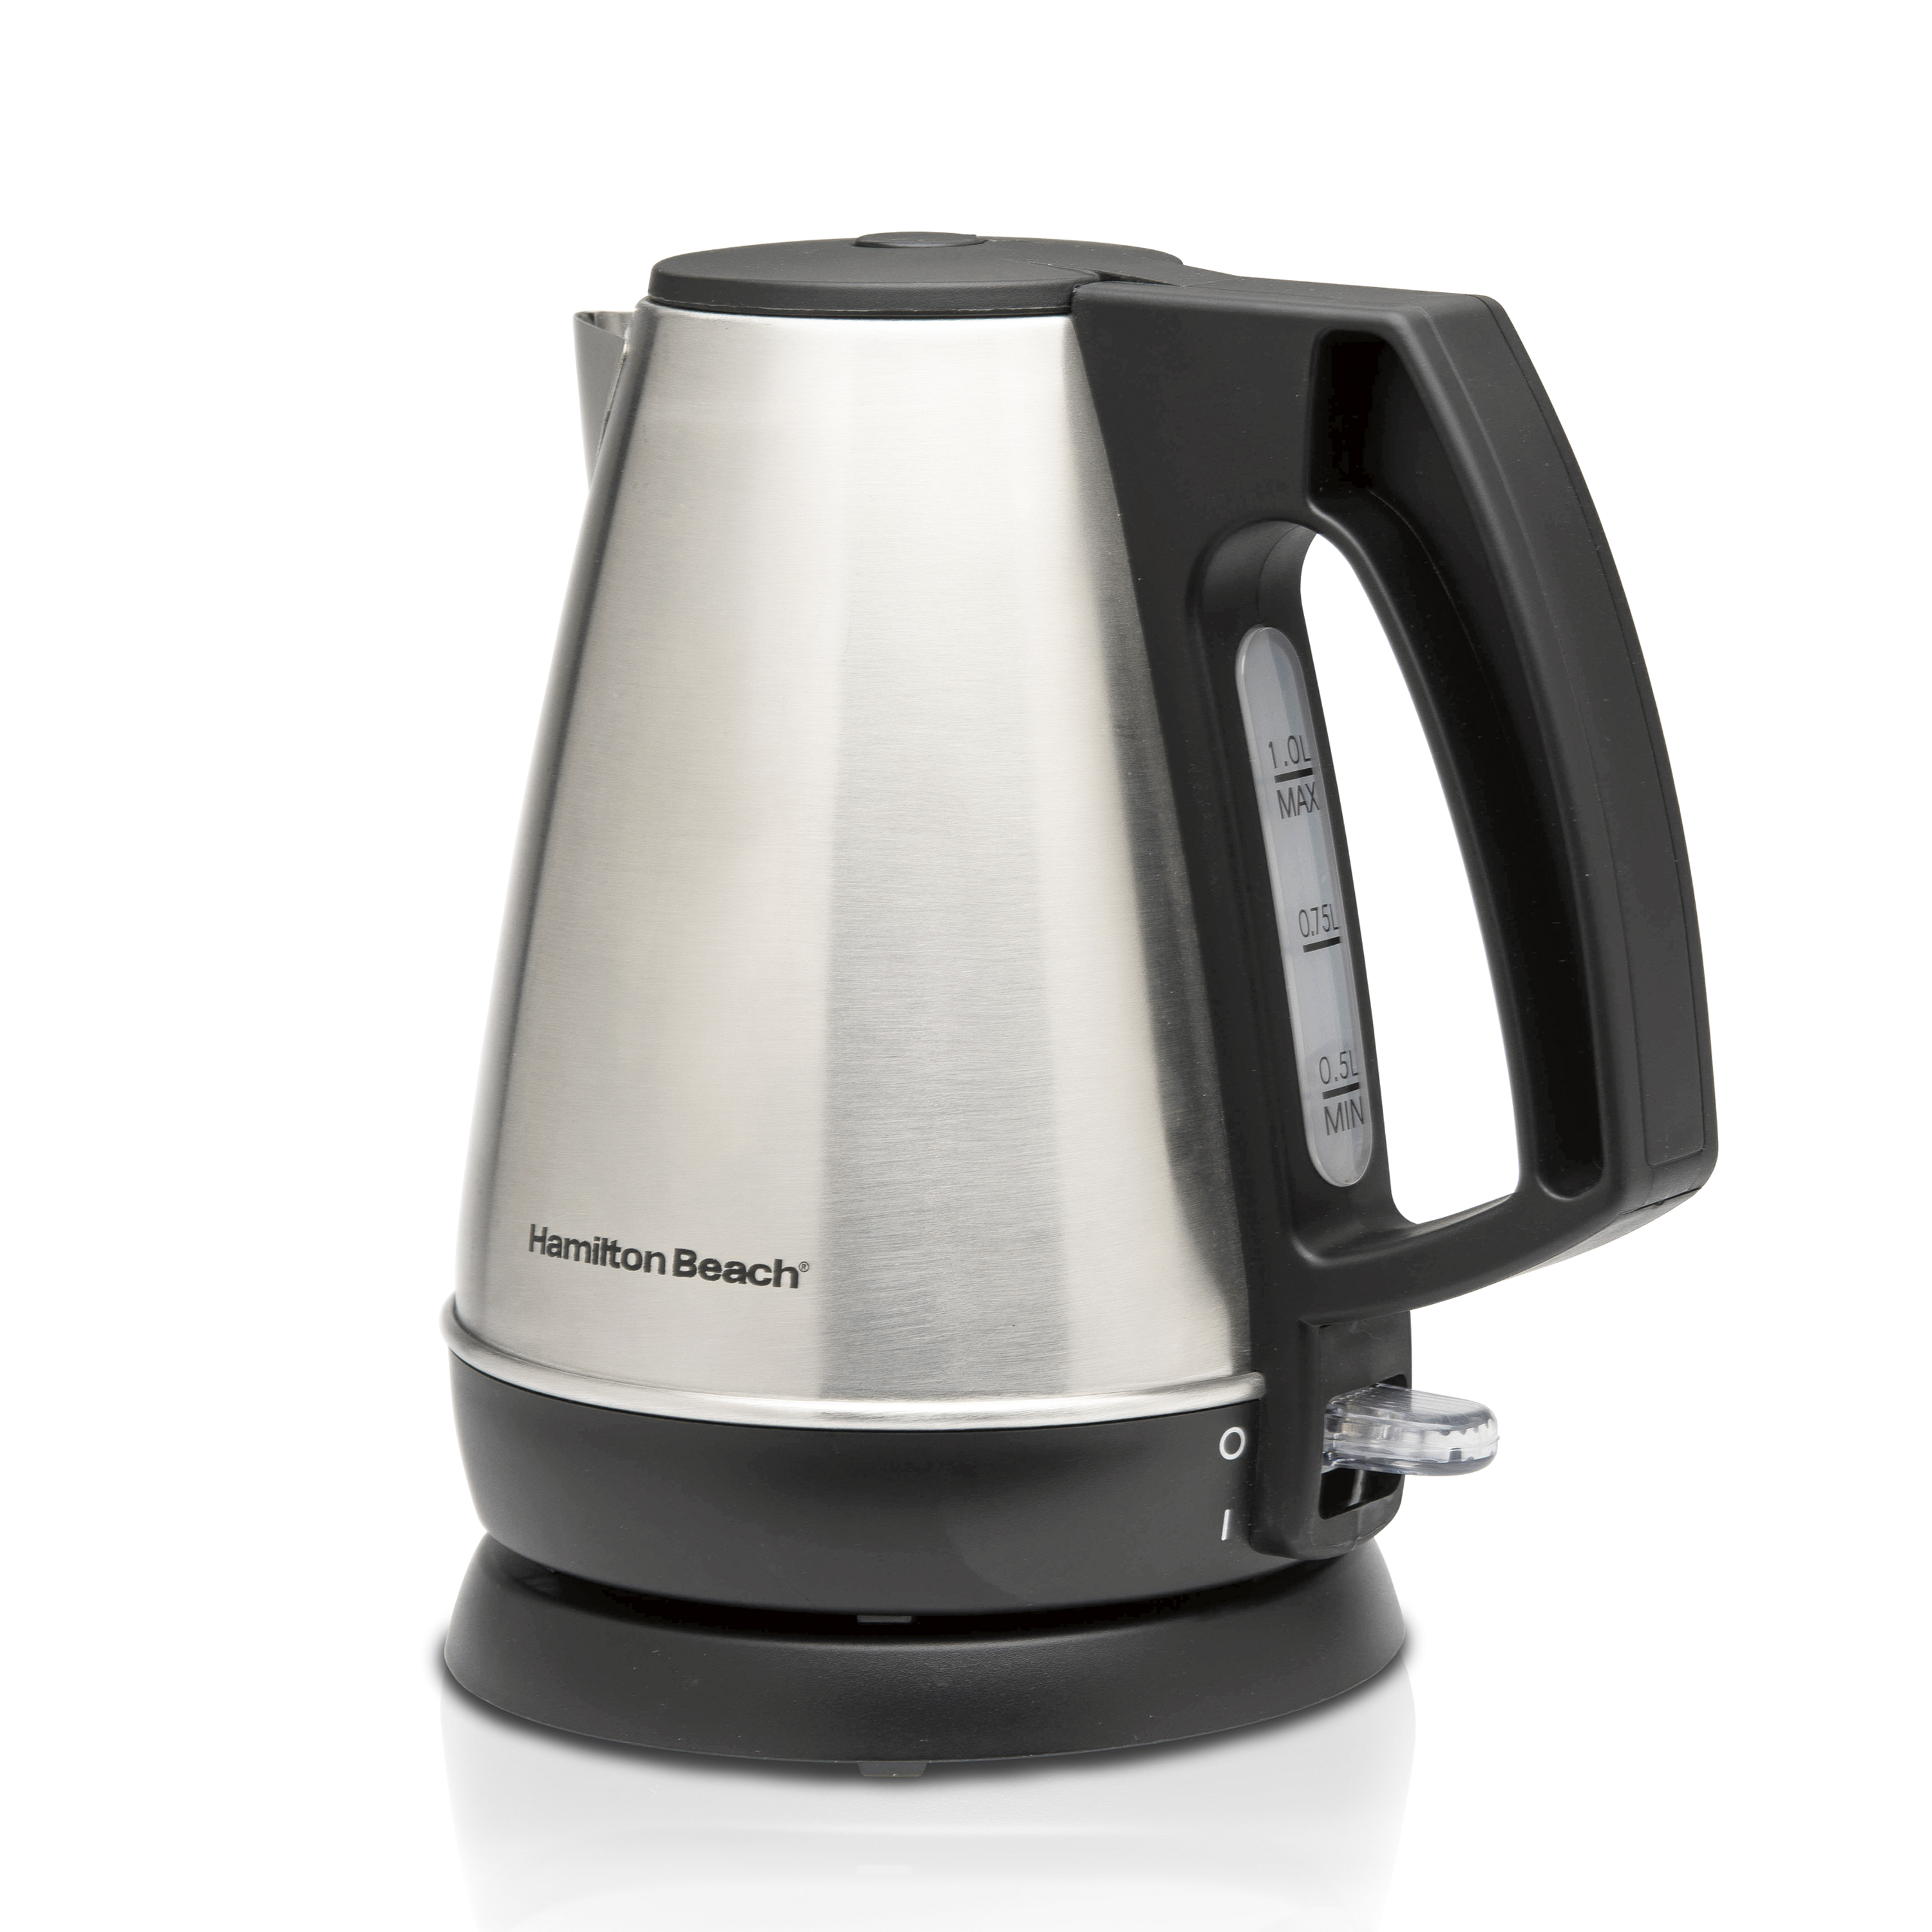 Hamilton Beach 1 Liter Electric Kettle, Stainless Steel and Black, New, 40901F - image 1 of 11